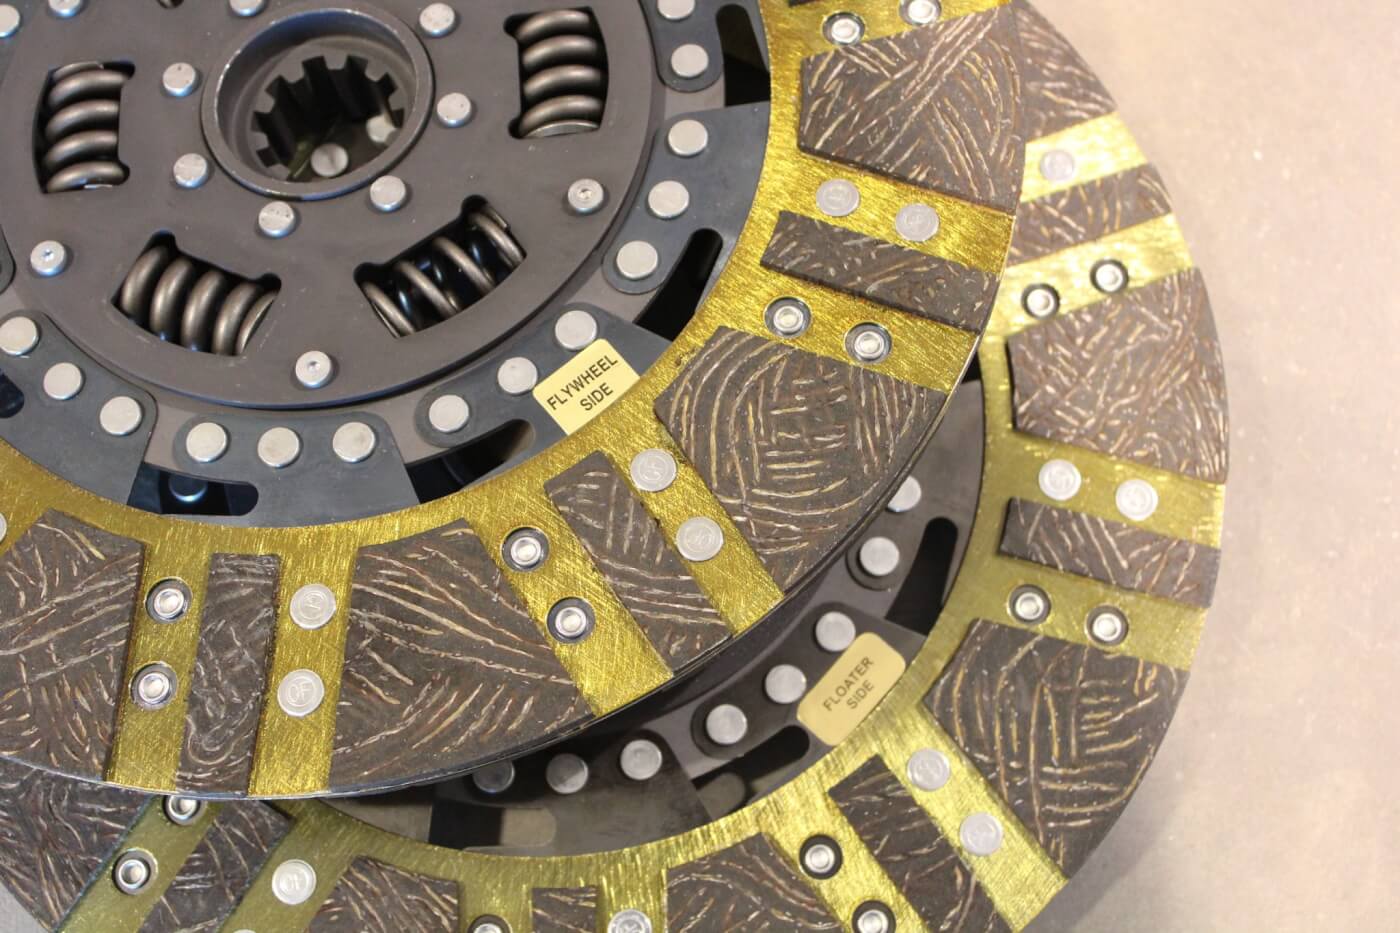 11. Everything is pre-assembled with the Centerforce kit, but there’s some assembly required when installing it in the truck. Pay close attention to the clutch discs, because the discs are not only side-specific, but position-specific. Centerforce labels everything to eliminate confusion.